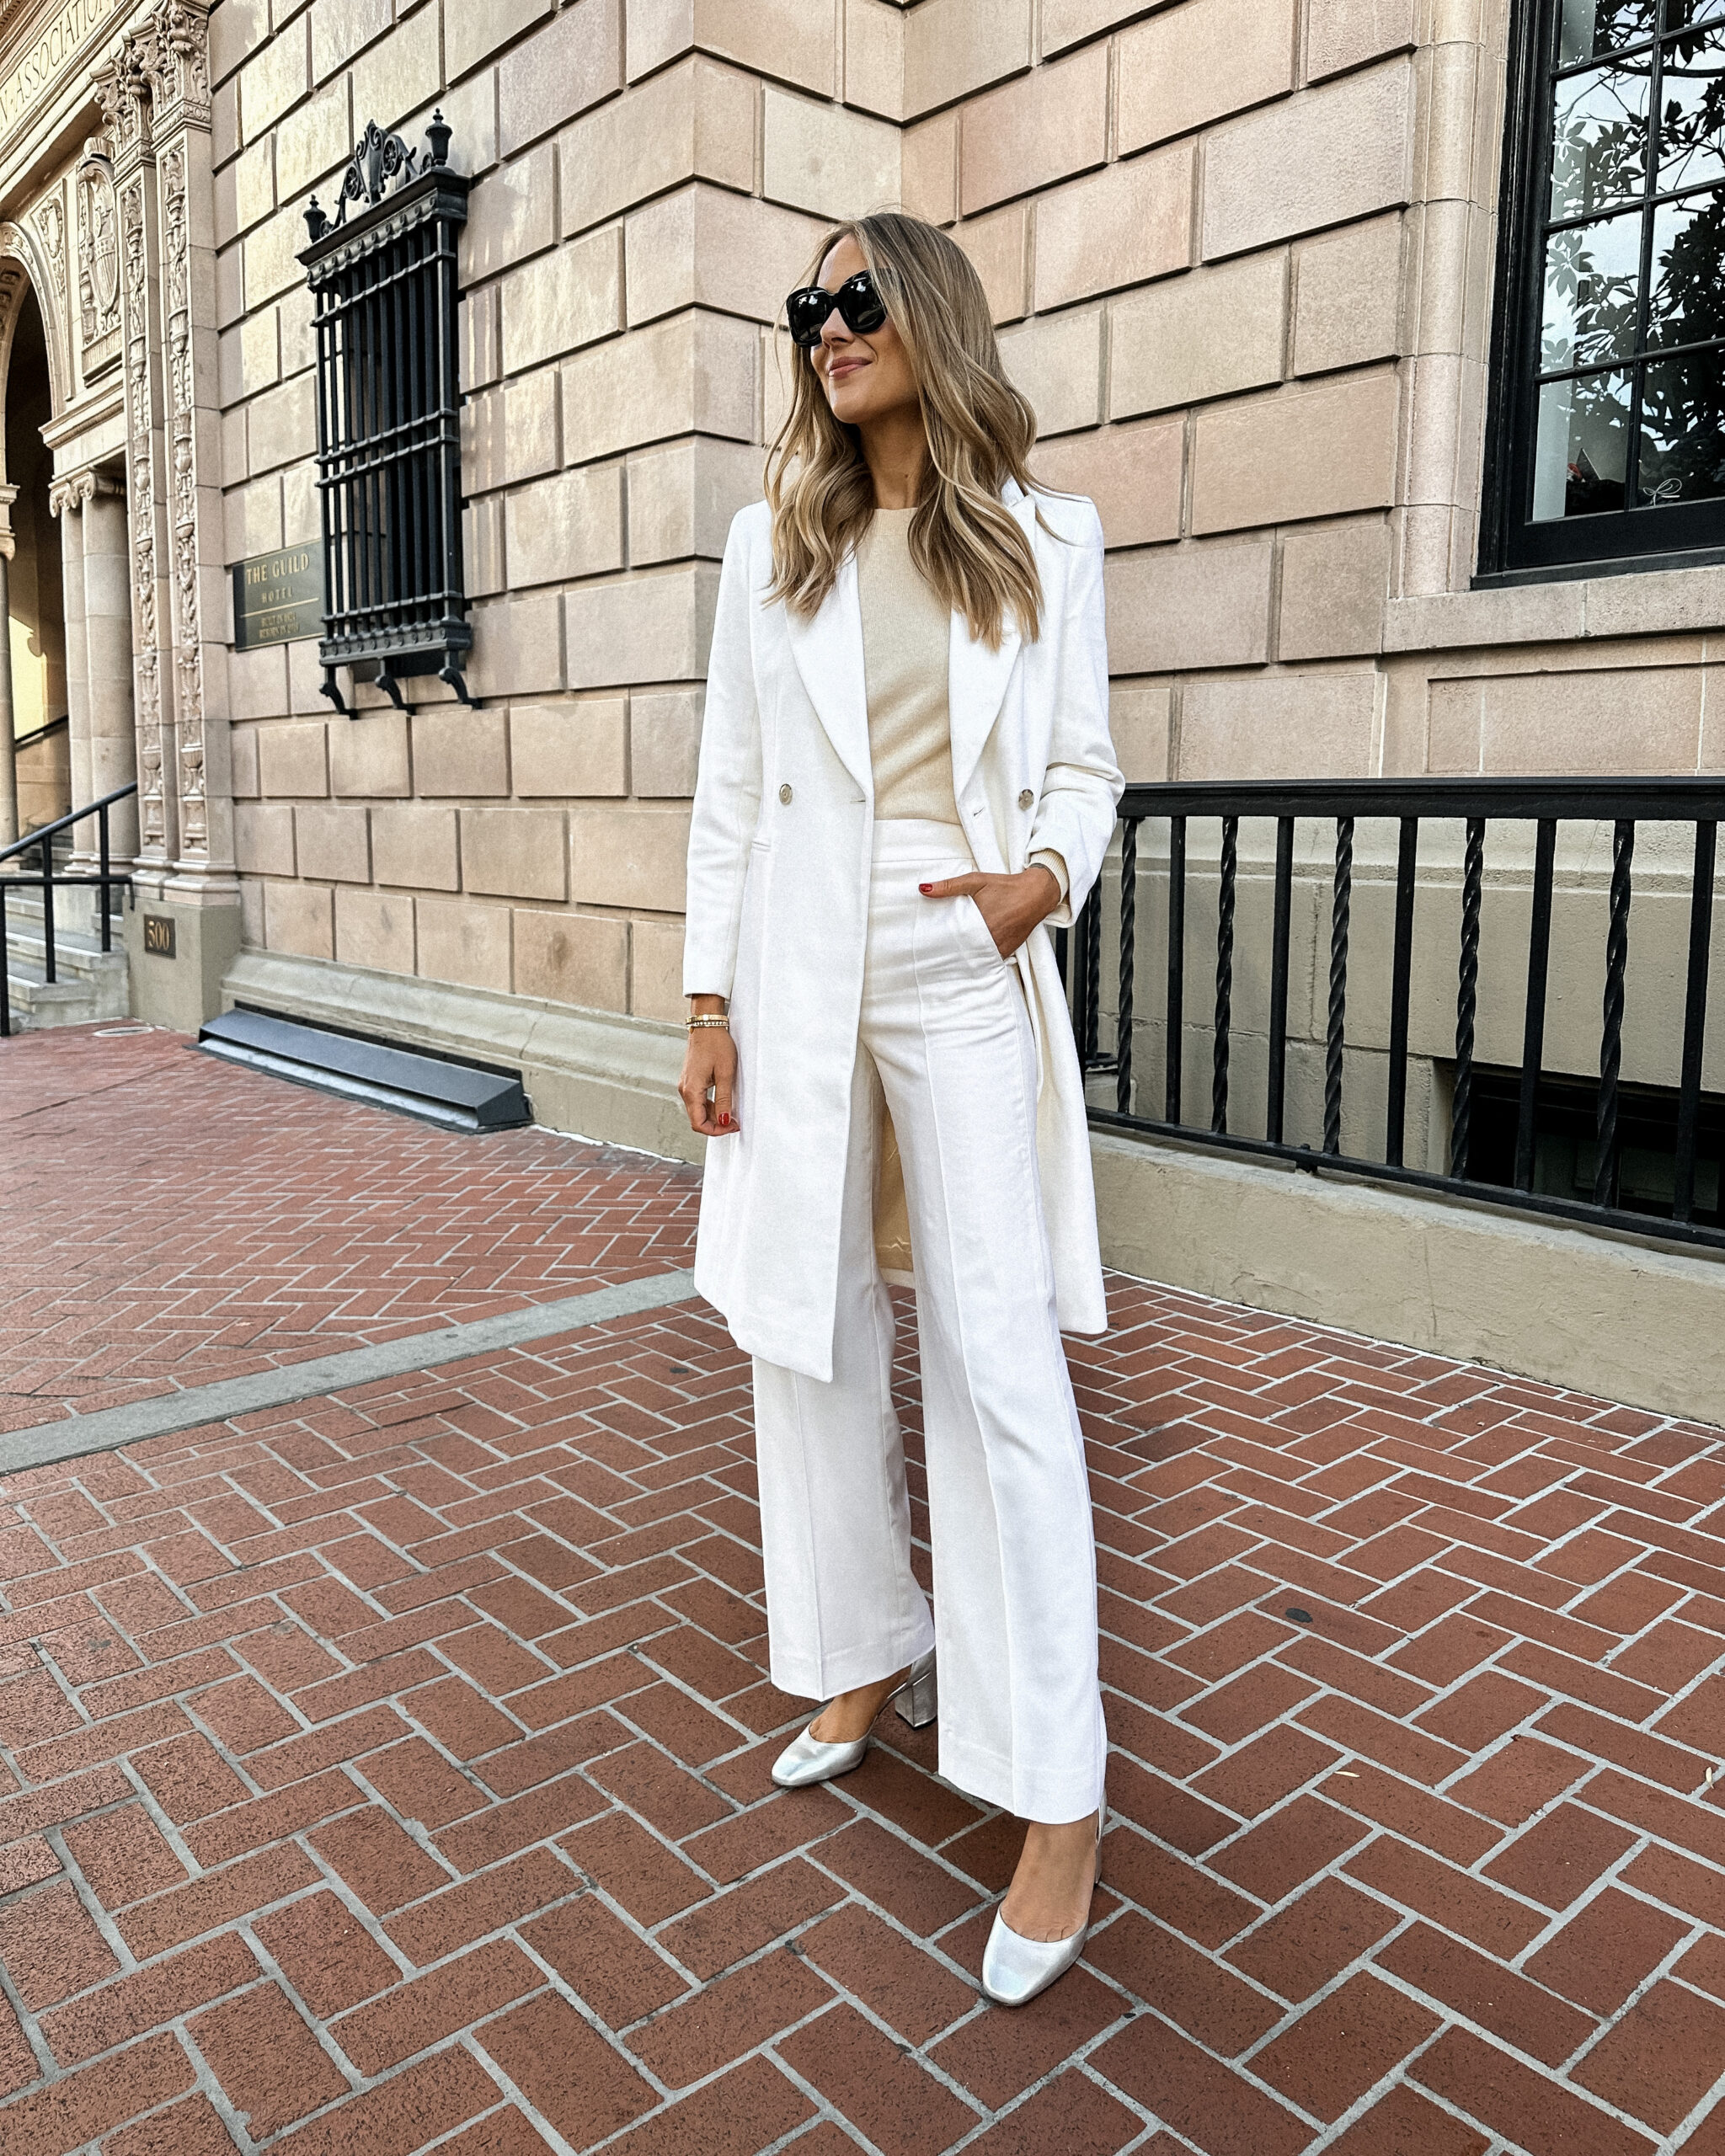 Fashion Jackson Wearing Jcrew White coat Beige Sweater White Wide Leg Pants Silver Pumps Holiday Outfit